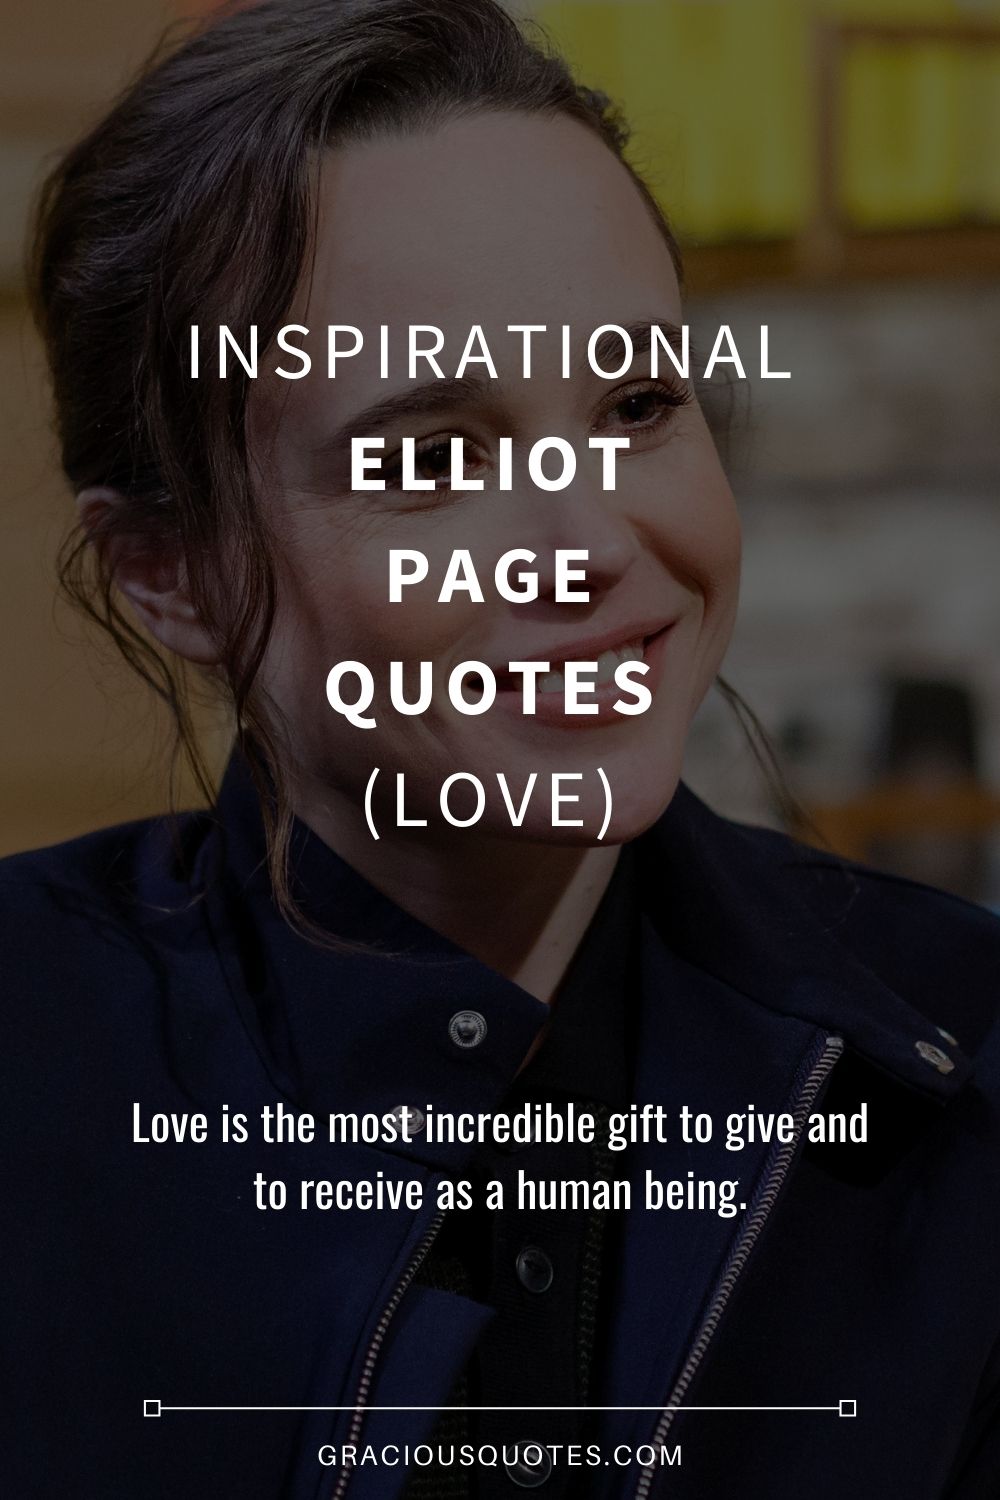 Inspirational Elliot Page Quotes LOVE Gracious Quotes